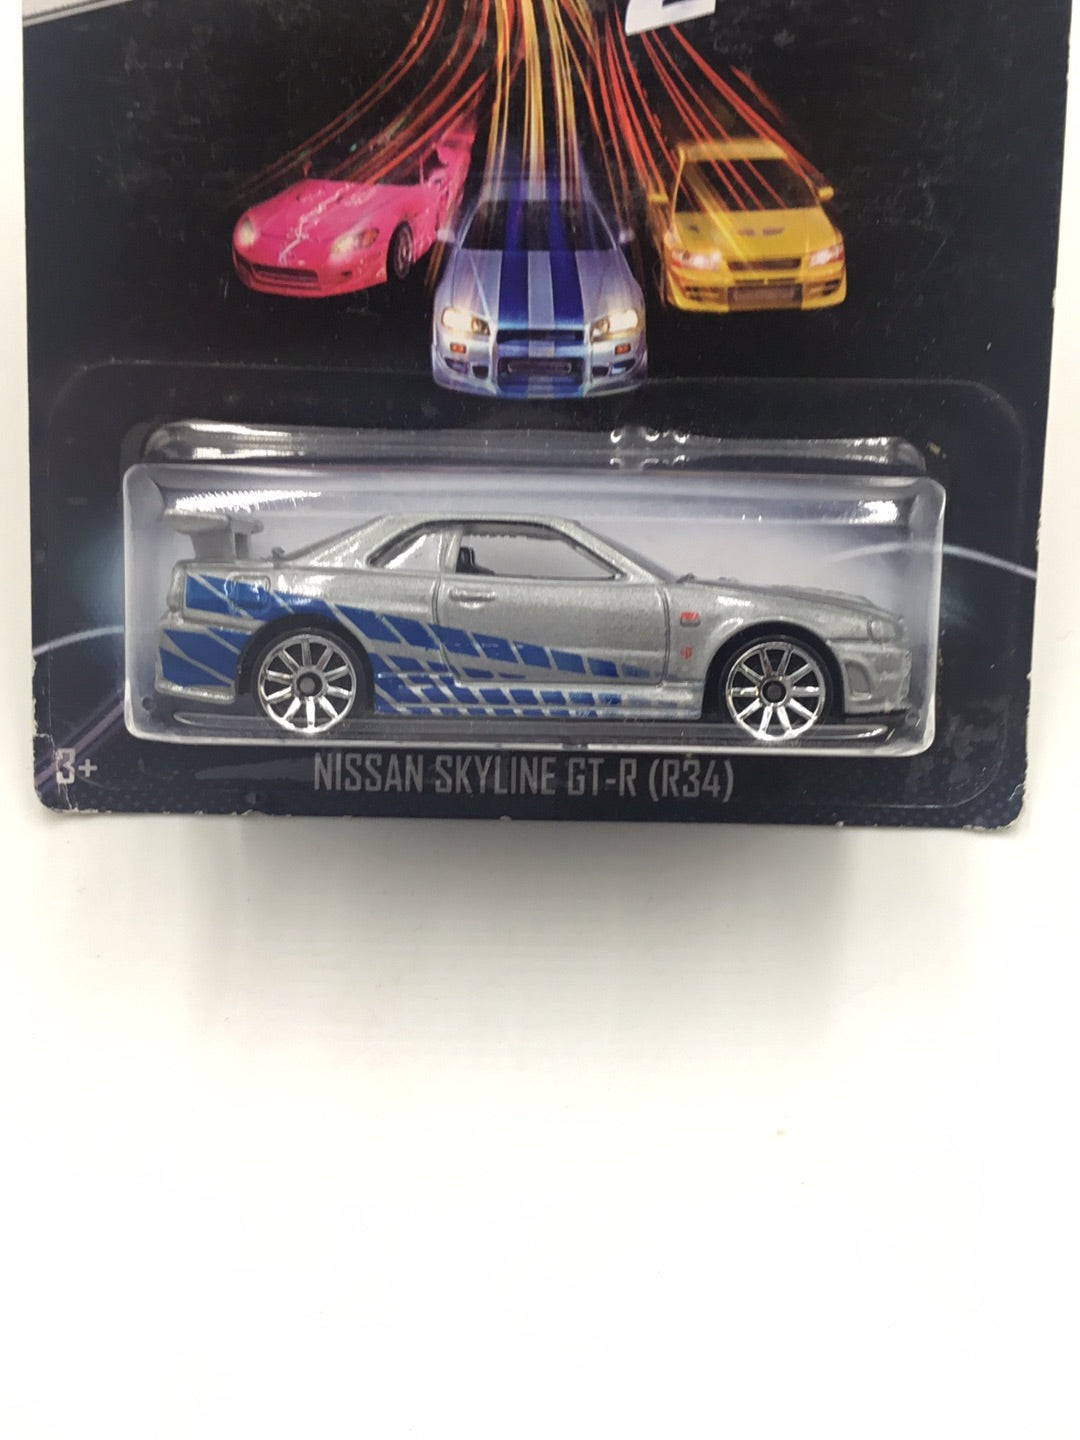 2013 Hot wheels fast and furious Nissan skyline GT-R (R34) #3 2 fast 2 Furious